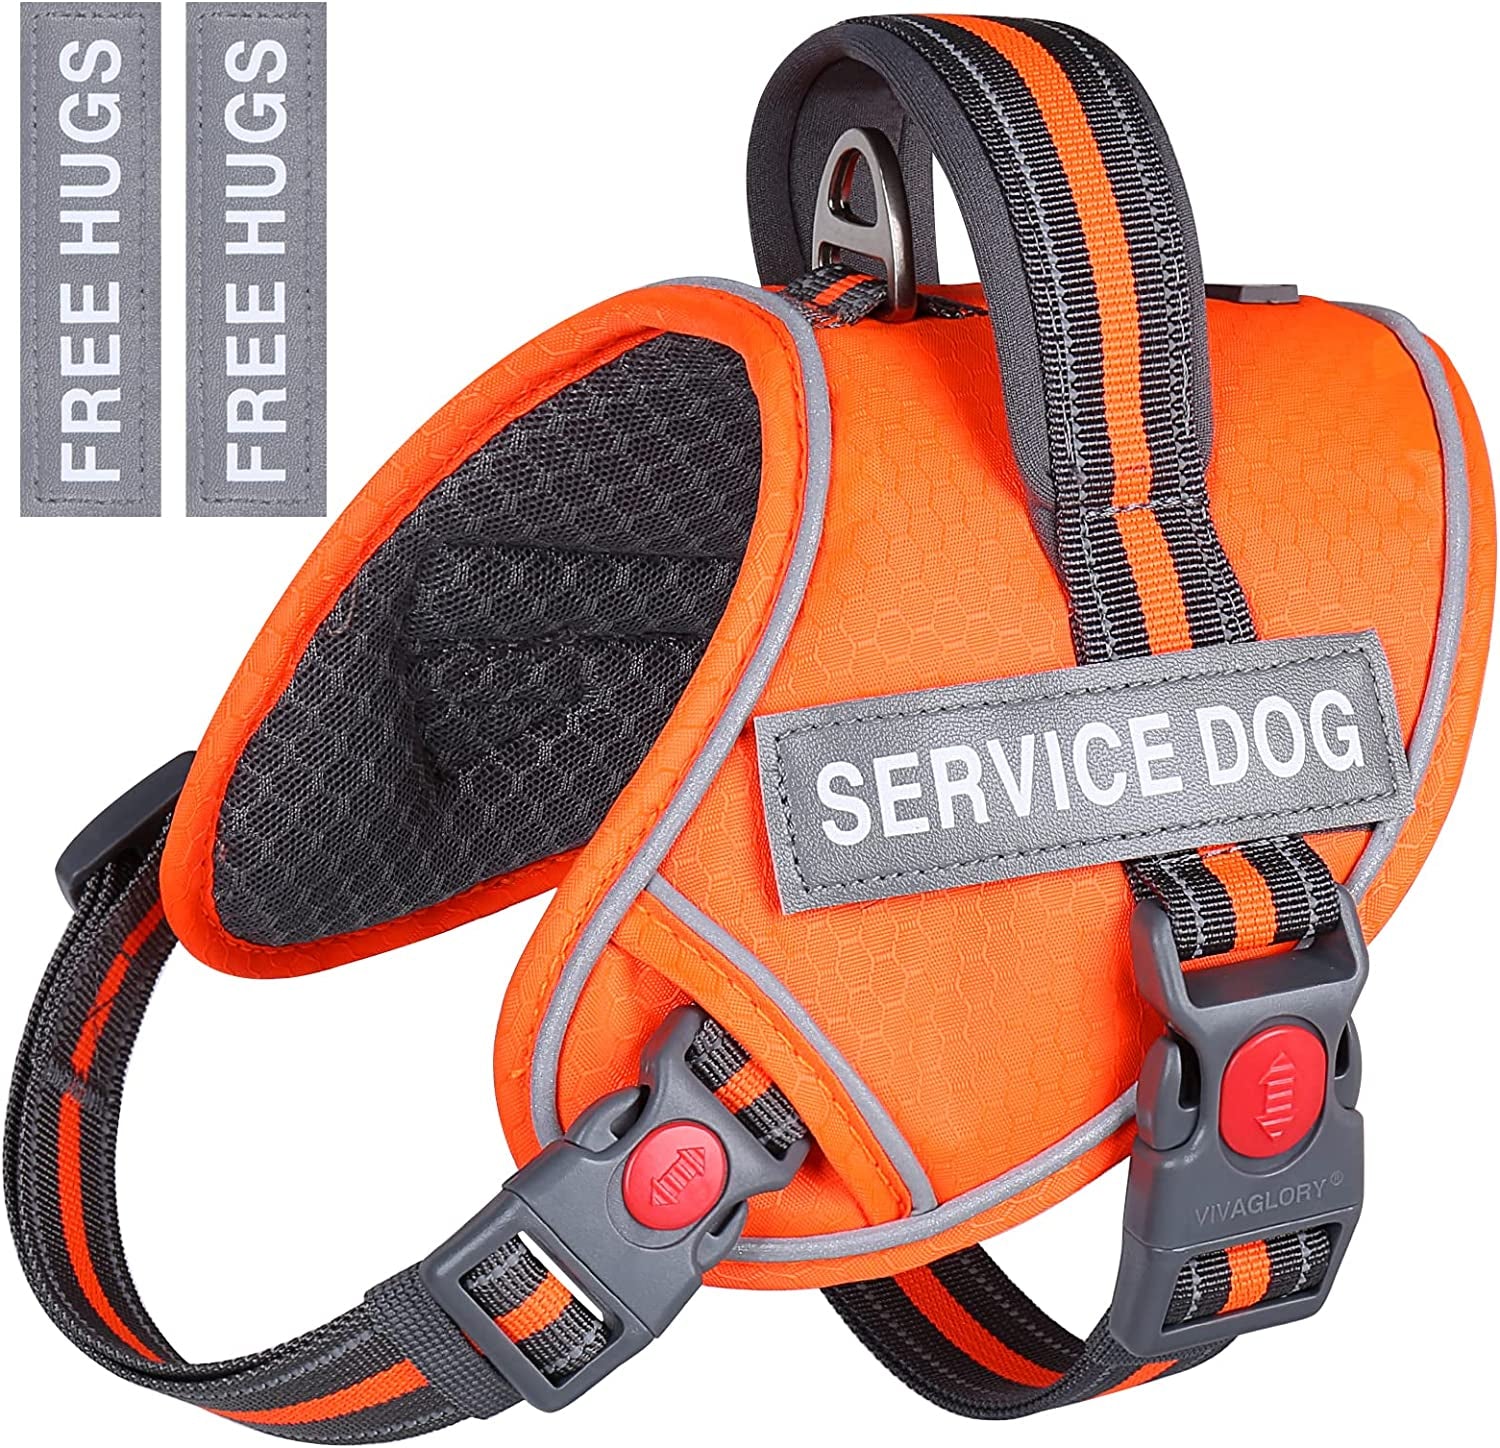 VIVAGLORY Service Dog Vest with Padded Handle, No Pull Adjustable Reflective Pet Vest Harness with 4 PCS Removable Patches for Small Dogs in Training, Pink